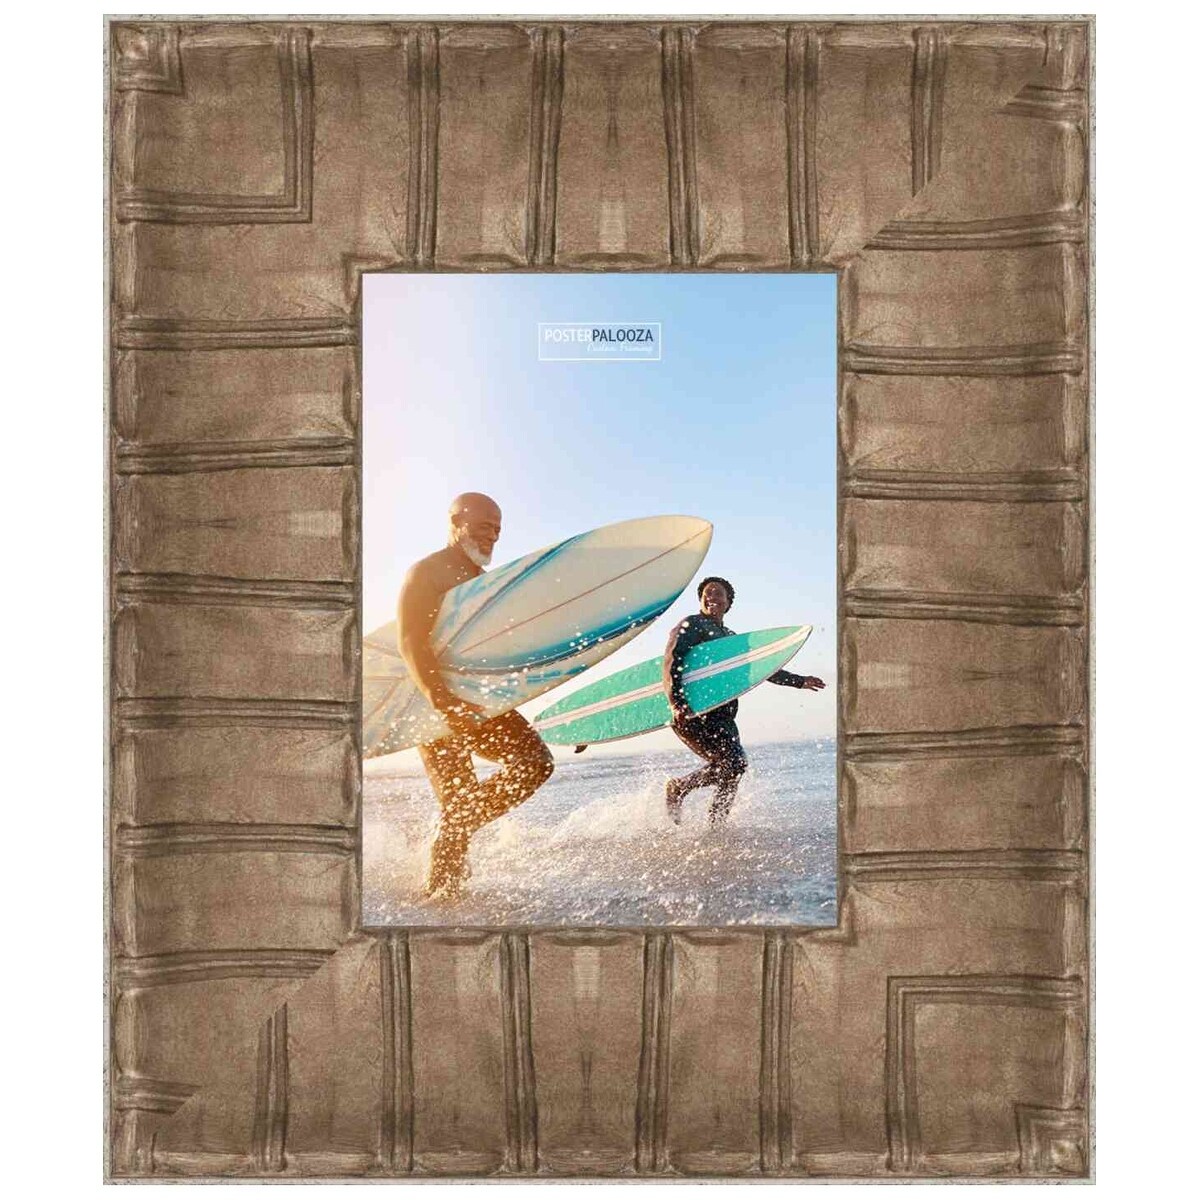 30x20 Frame Silver Ornate Antique Solid Wood Picture Frame - UV Acrylic, Foam Board Backing, & Hanging Hardware Included